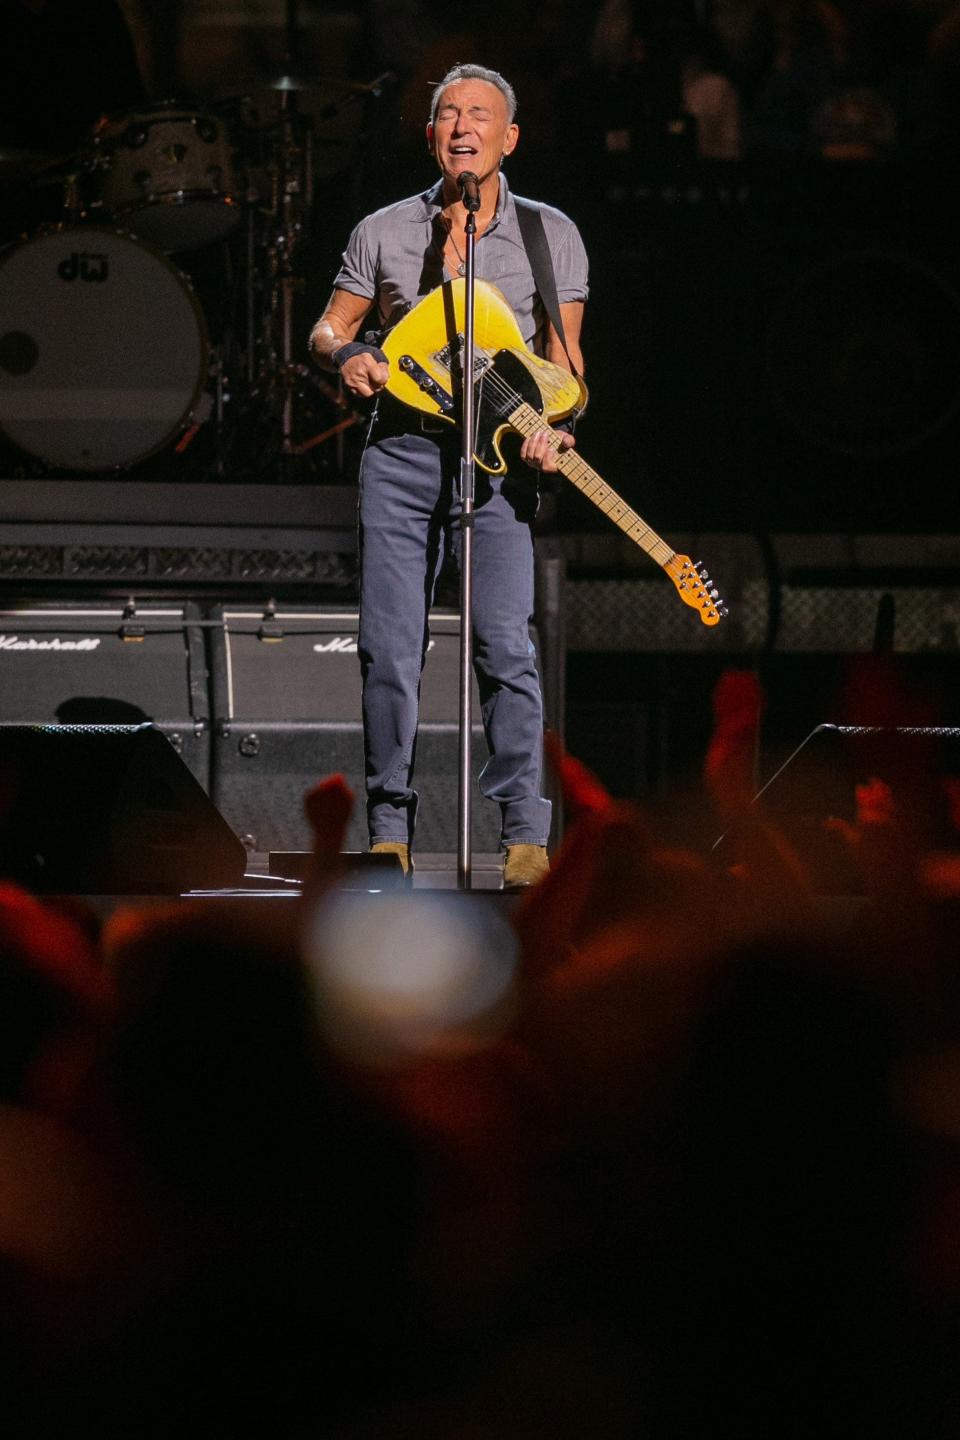 Bruce Springsteen and the E Street Band perform at the BOK Center on Tuesday, February 21, 2023, in Tulsa, Okla.